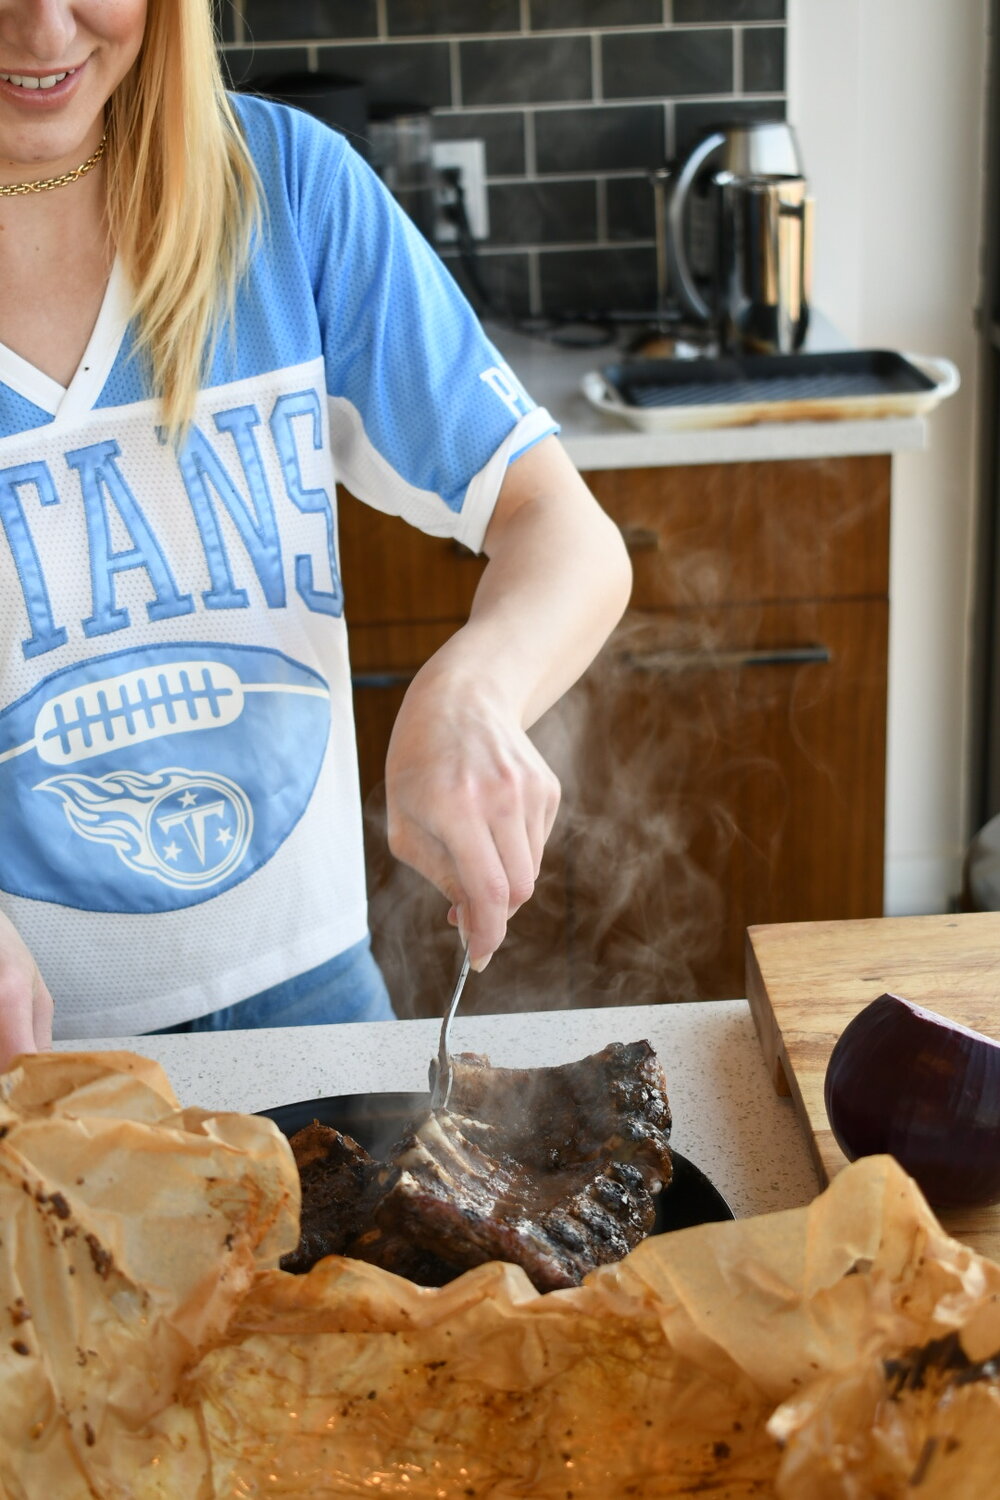 ribs out of oven_Amber Strohauer_Strohauer Farms_Fairy Gutmother Carley Smith_Super Bowl Guide.JPG